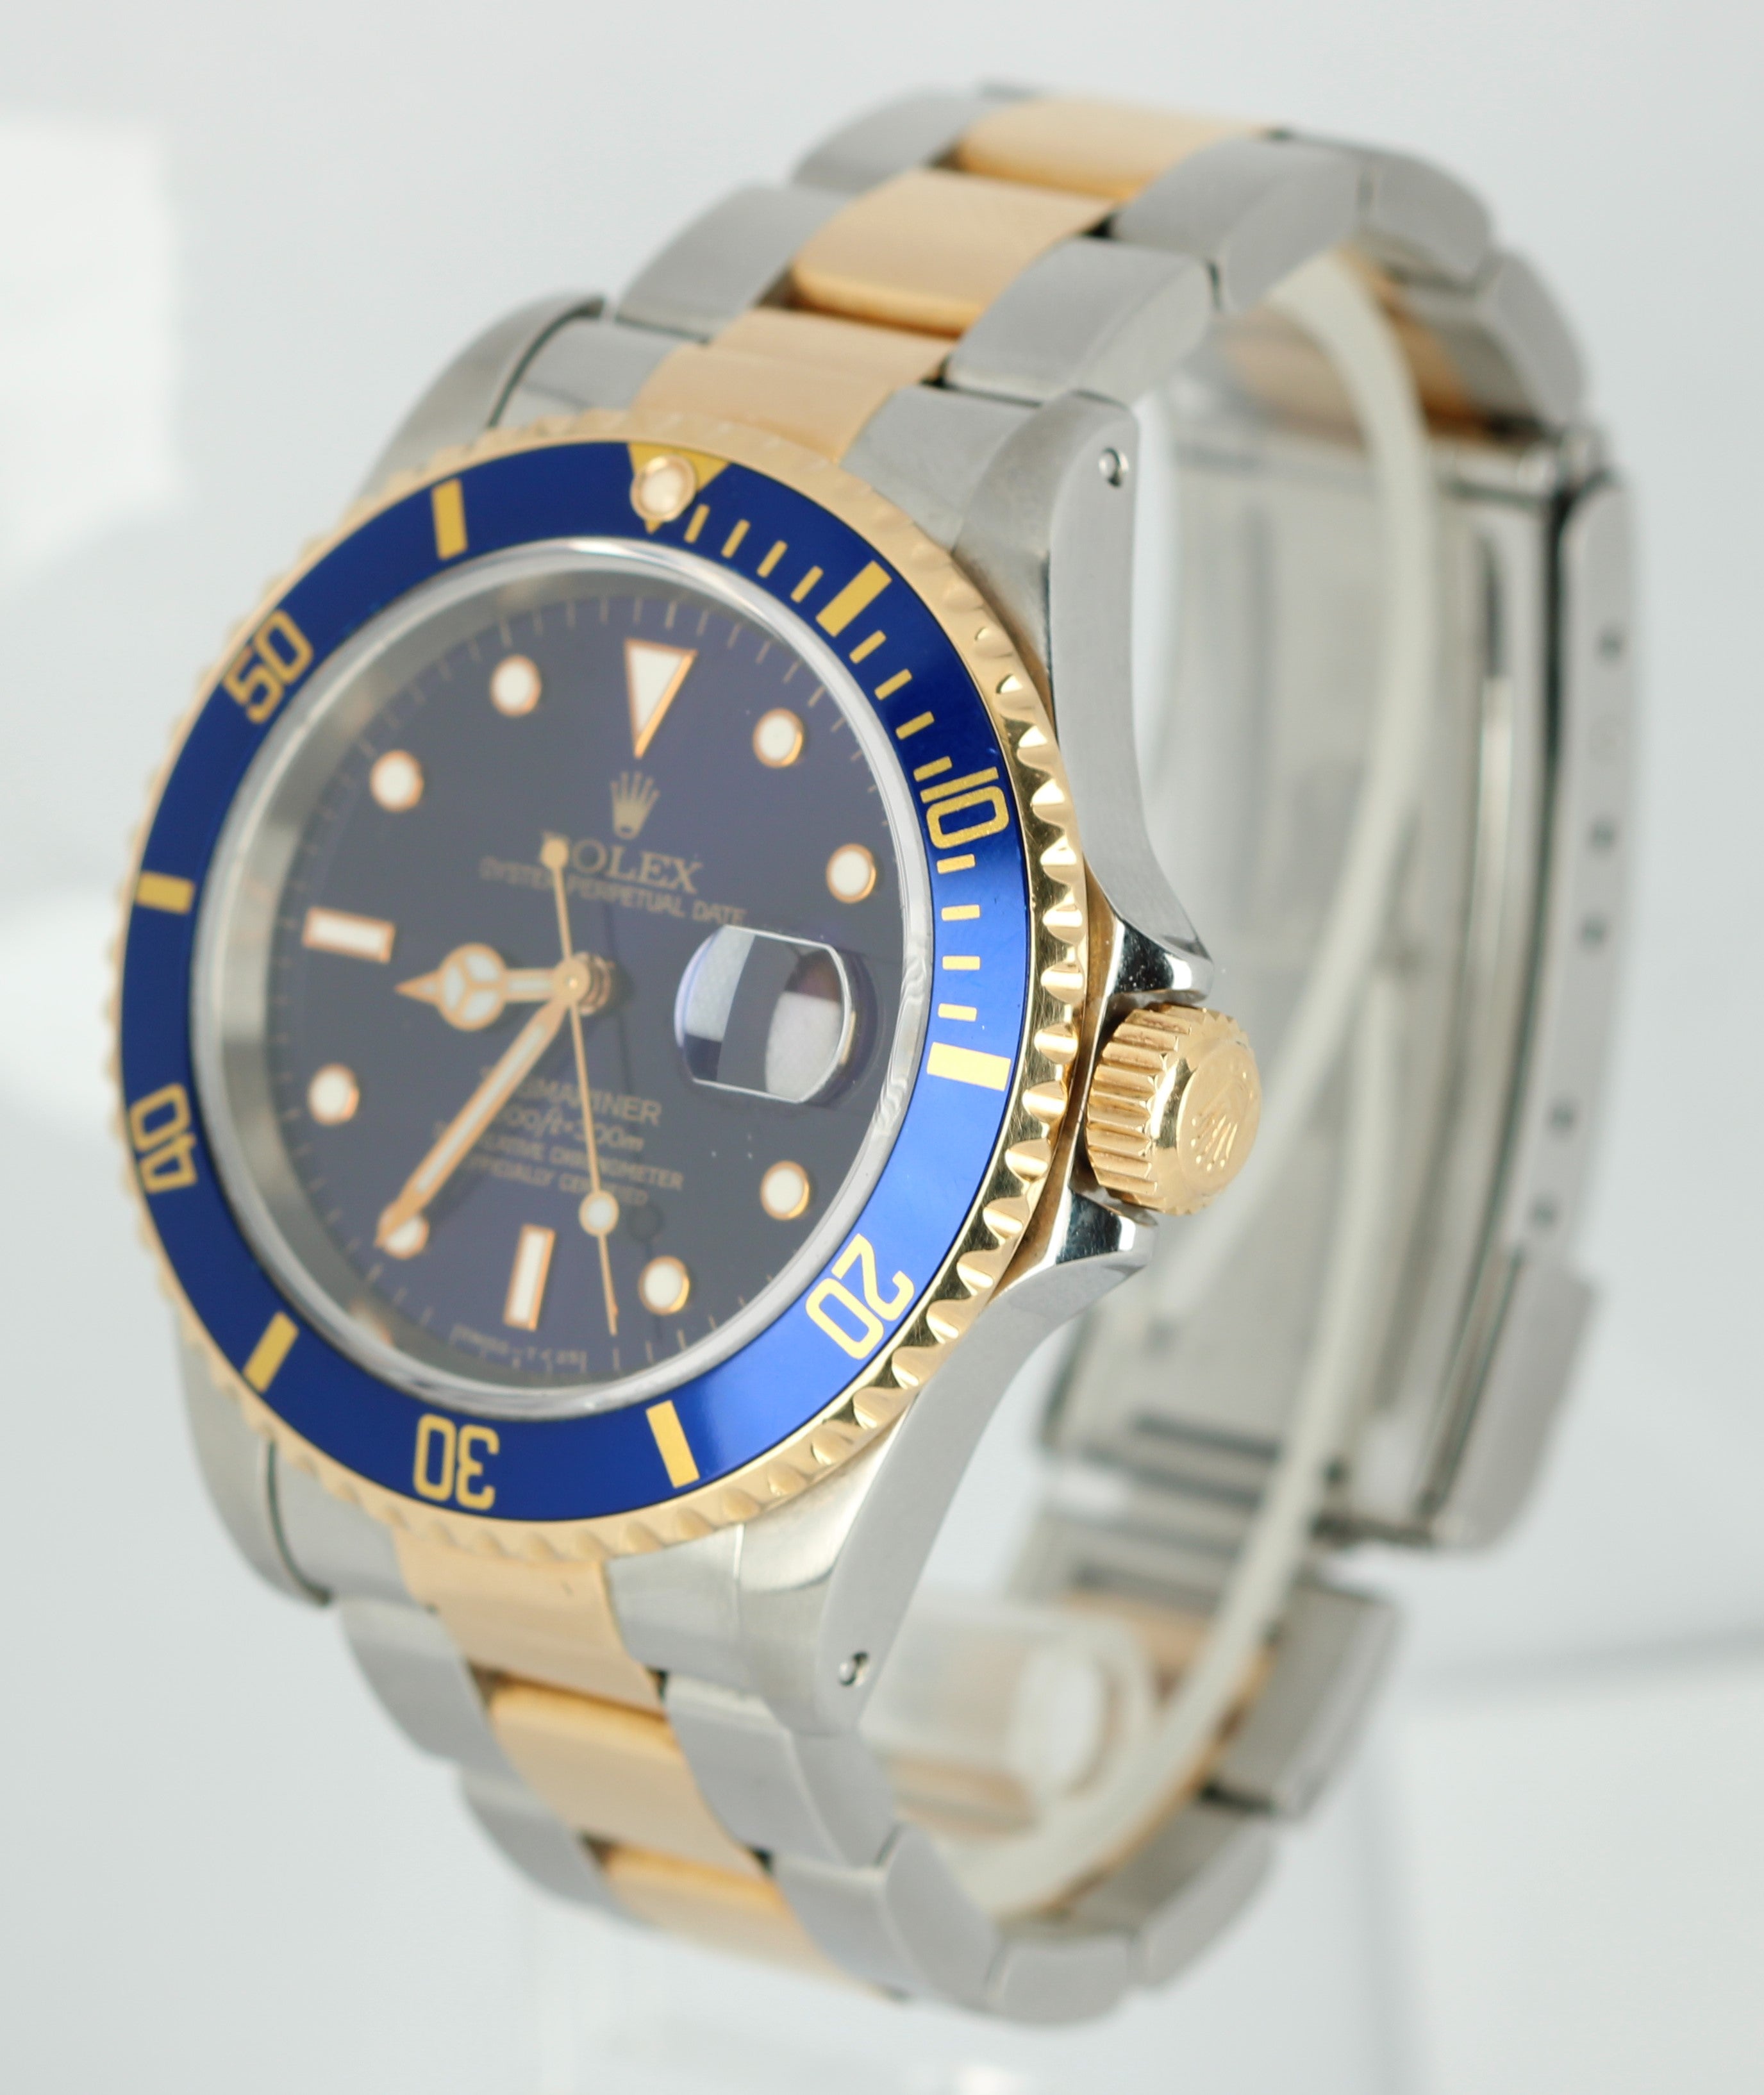 Rolex Submariner Two-Tone 18K Gold Stainless Steel Blue 40mm Oyster Watch 16613